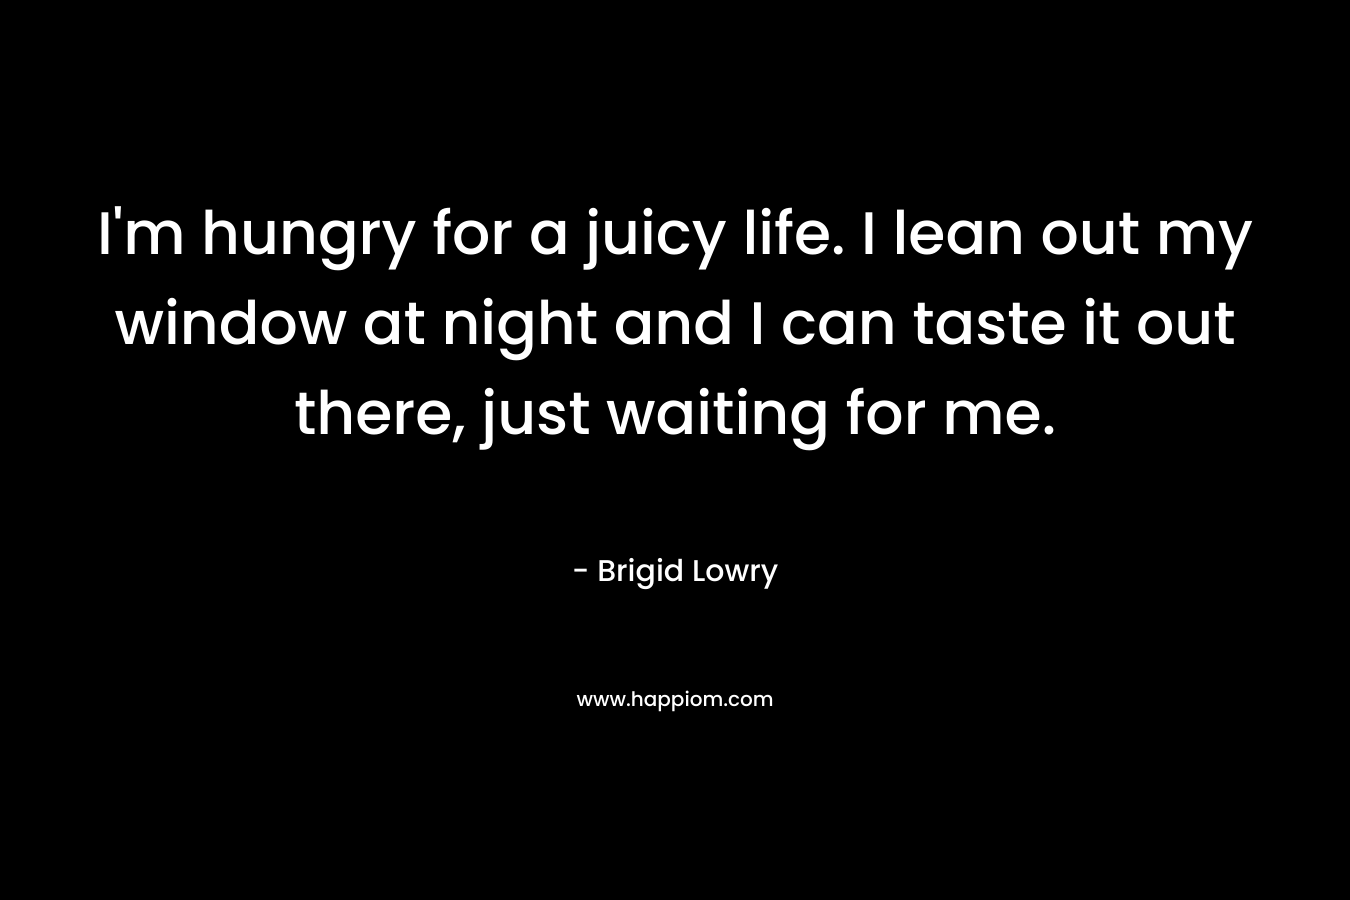 I’m hungry for a juicy life. I lean out my window at night and I can taste it out there, just waiting for me. – Brigid Lowry